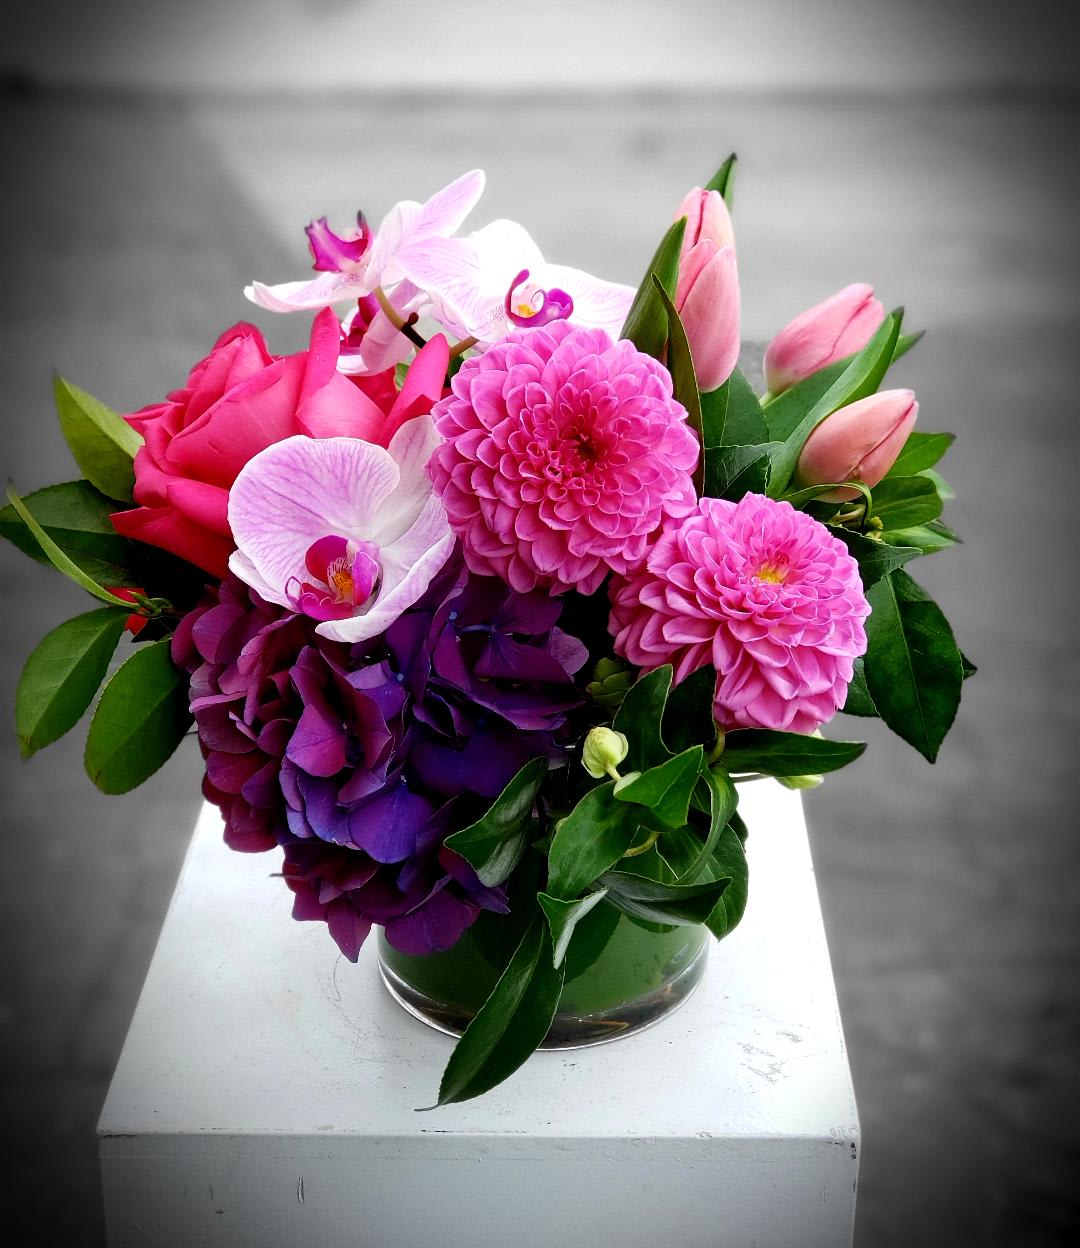 Summer at griffith Park - Purple and Pink Pizzaz with hydrangea,tulips, roses and orchids presented beautifully in this sweet arrangement. 